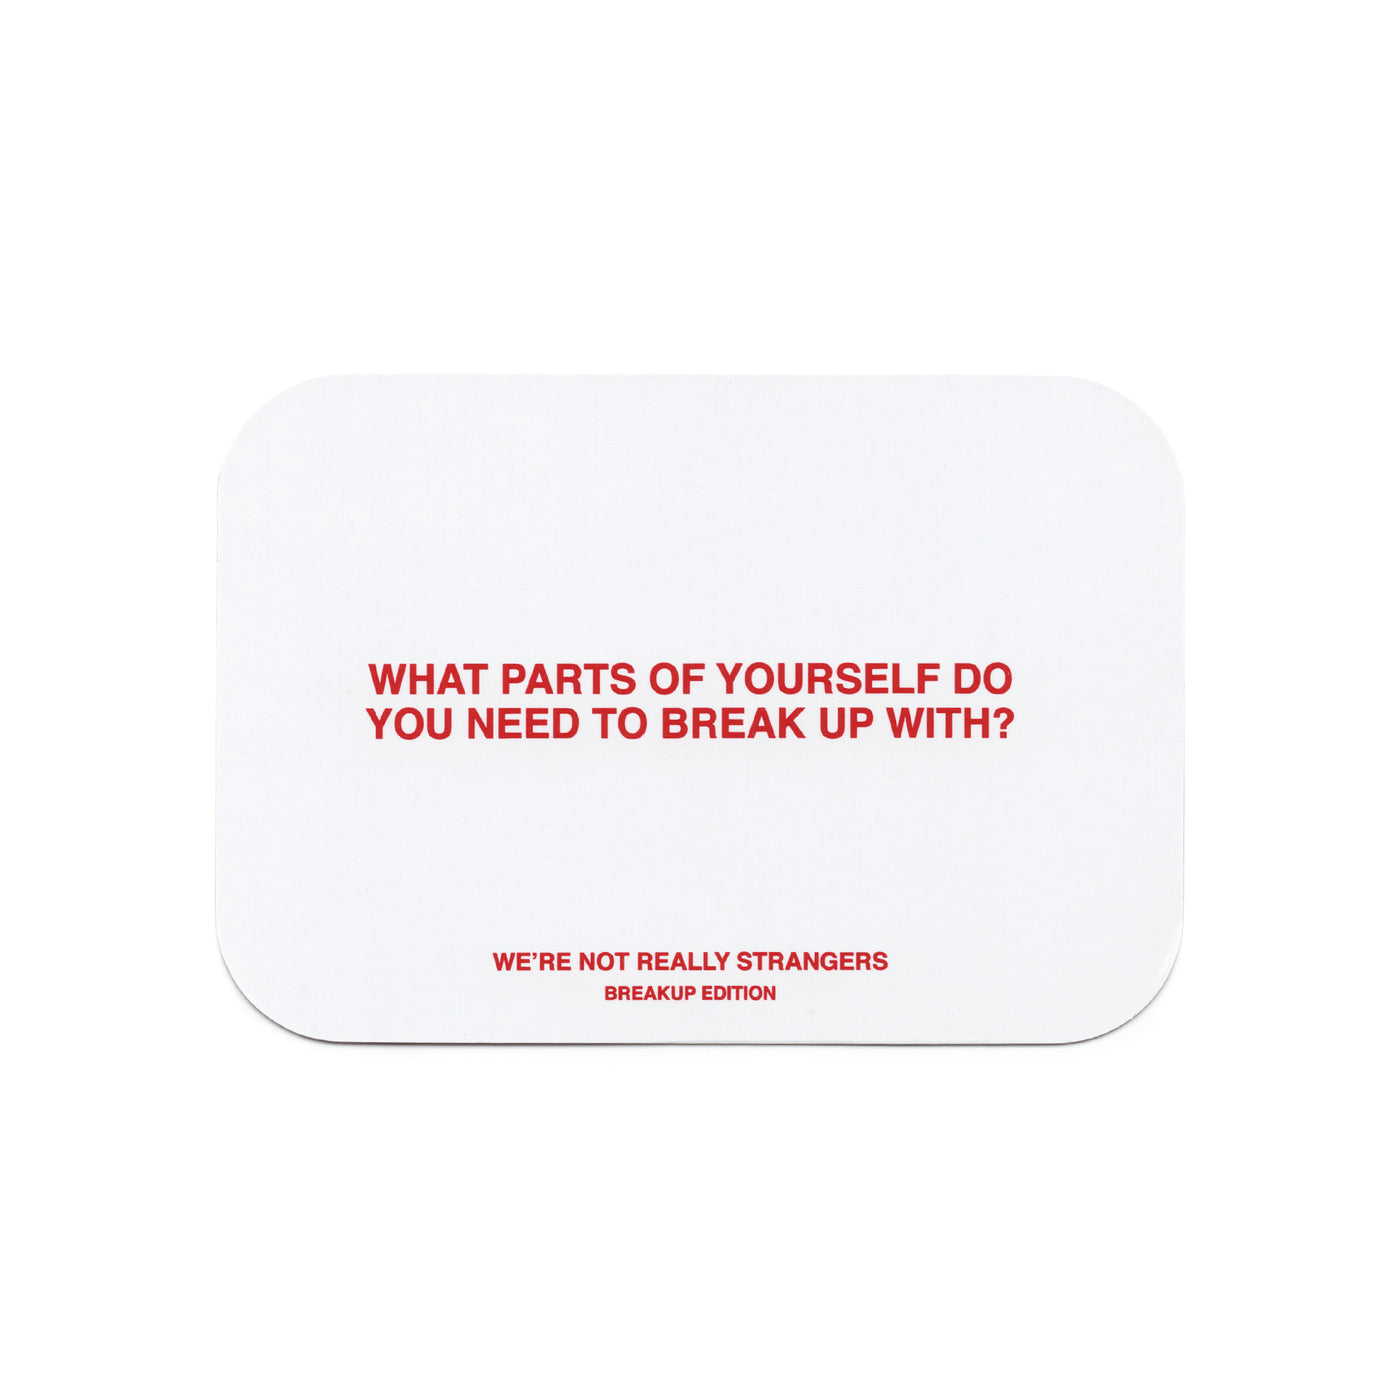 We're Not Really Strangers Breakup Edition card reading "What parts of yourself do you need to break up with?"